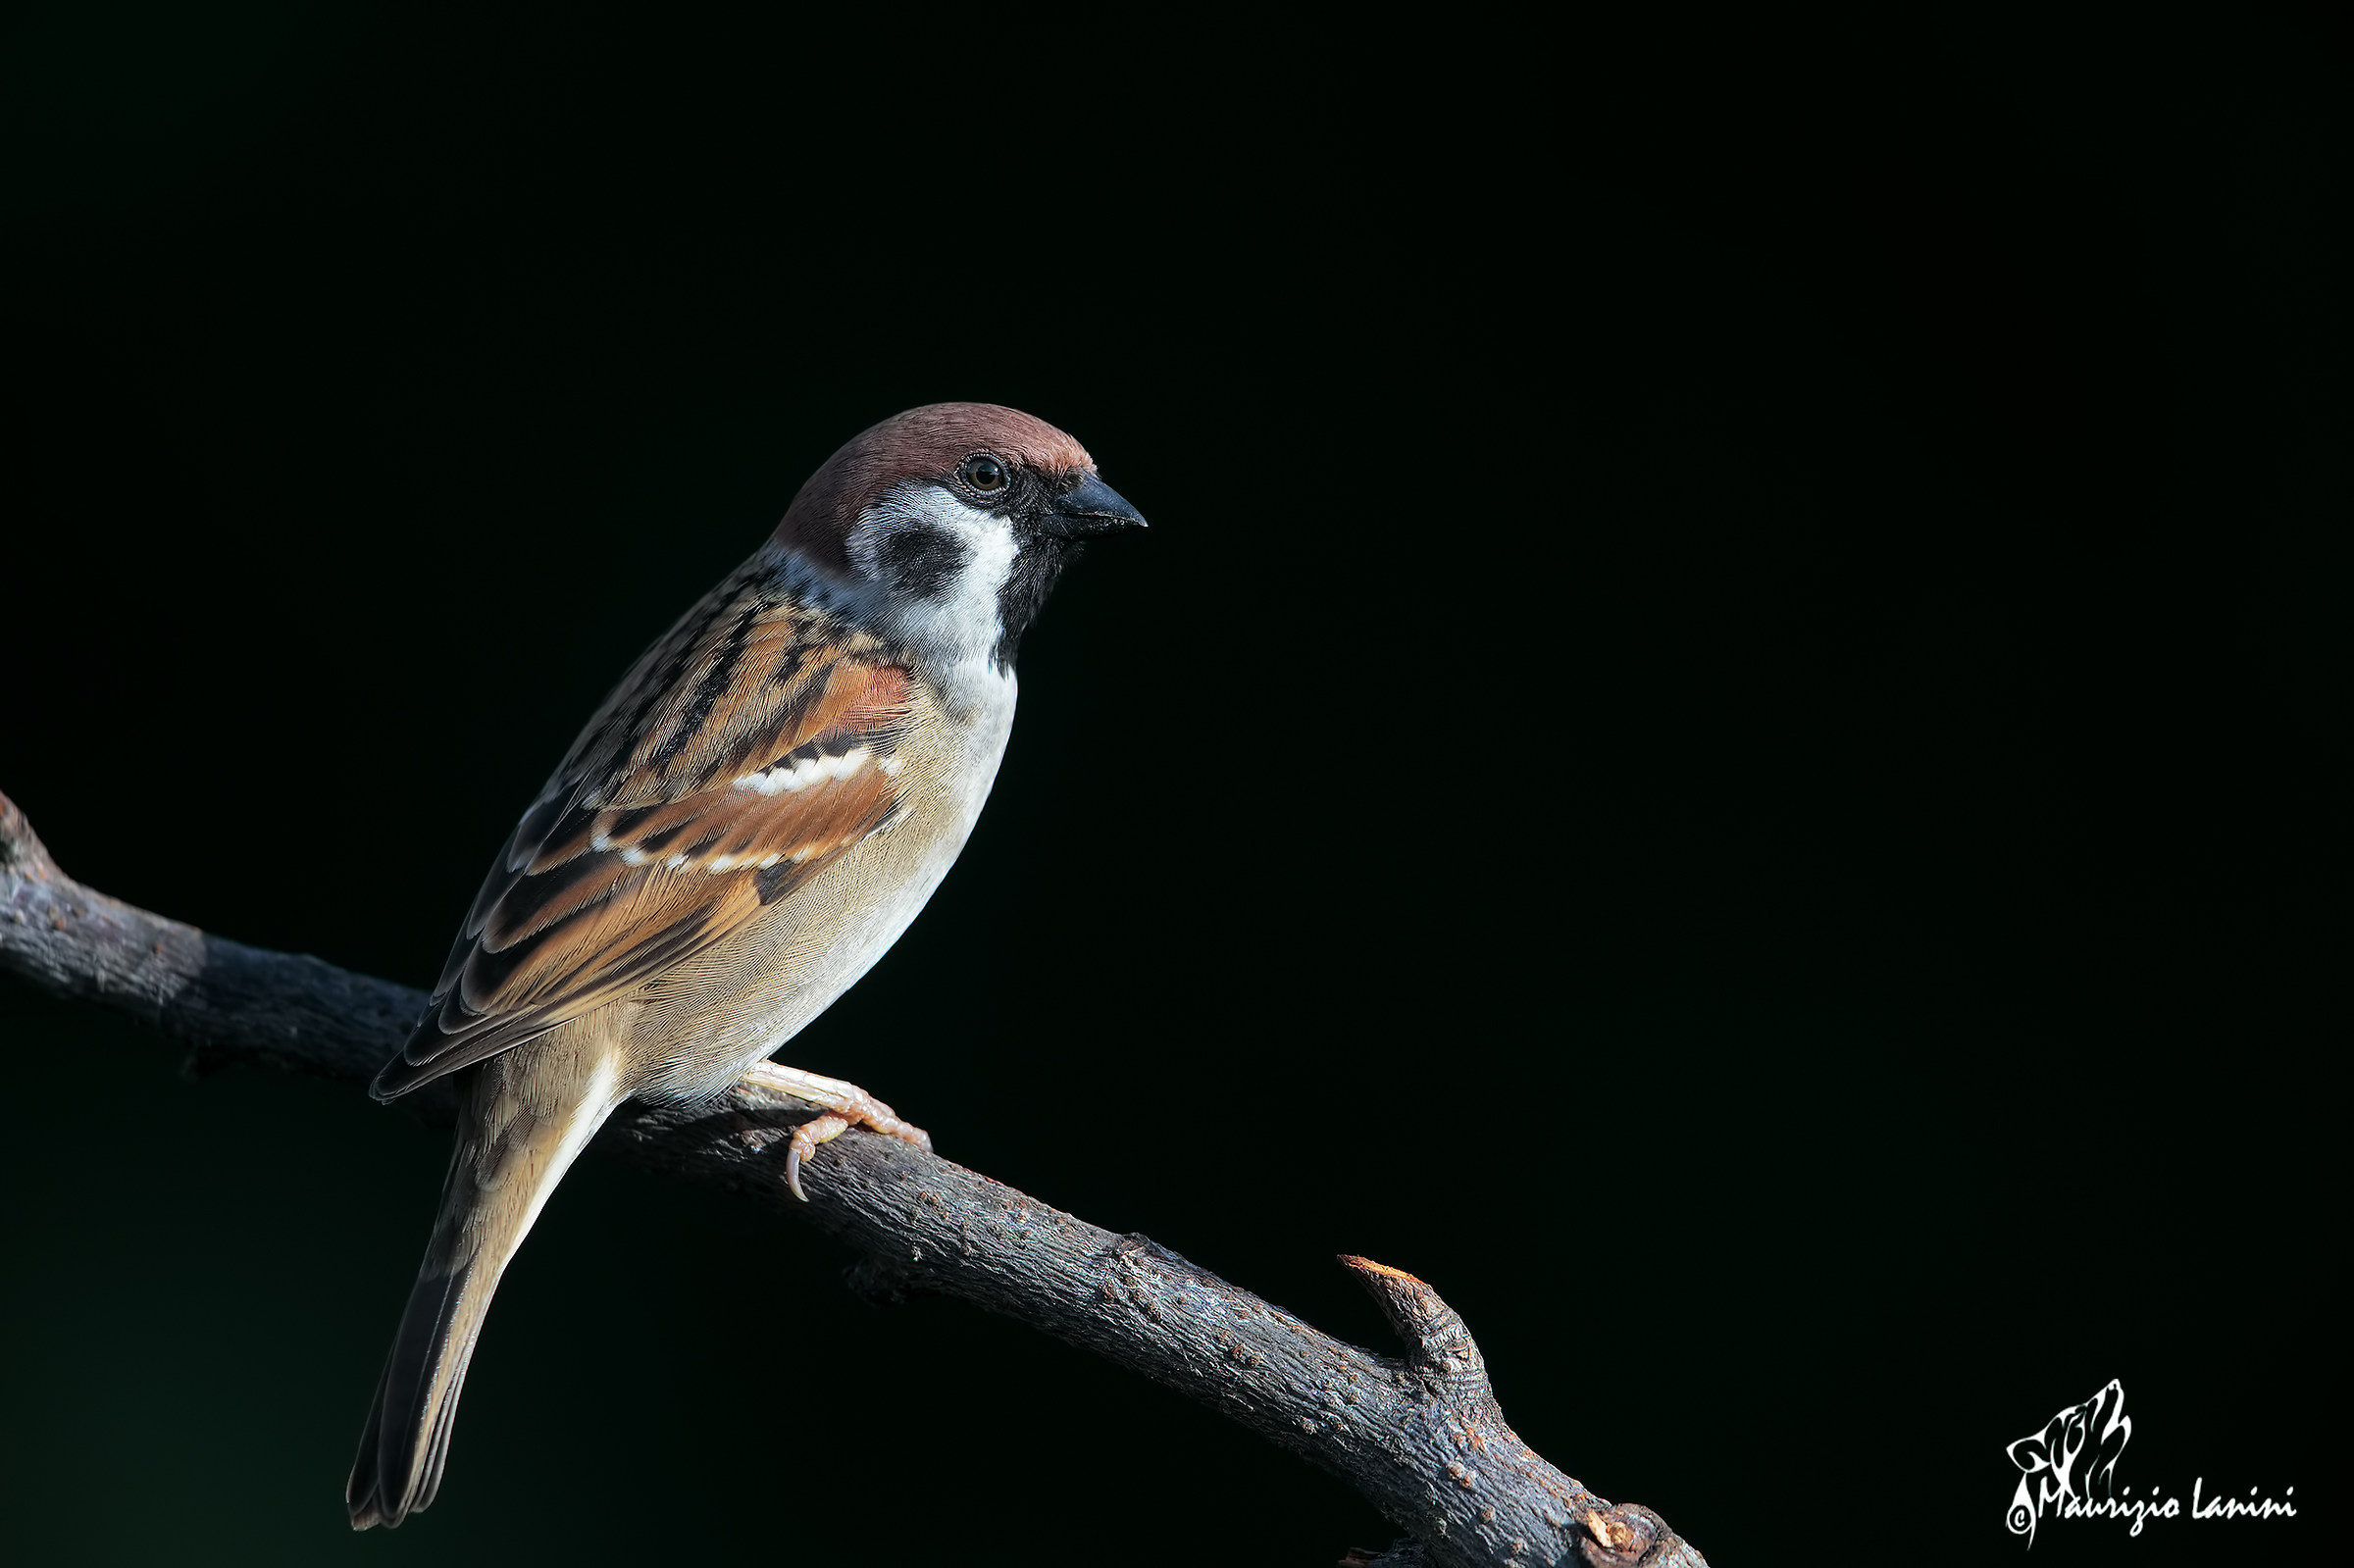 The much-exploited tree sparrow (HD)...